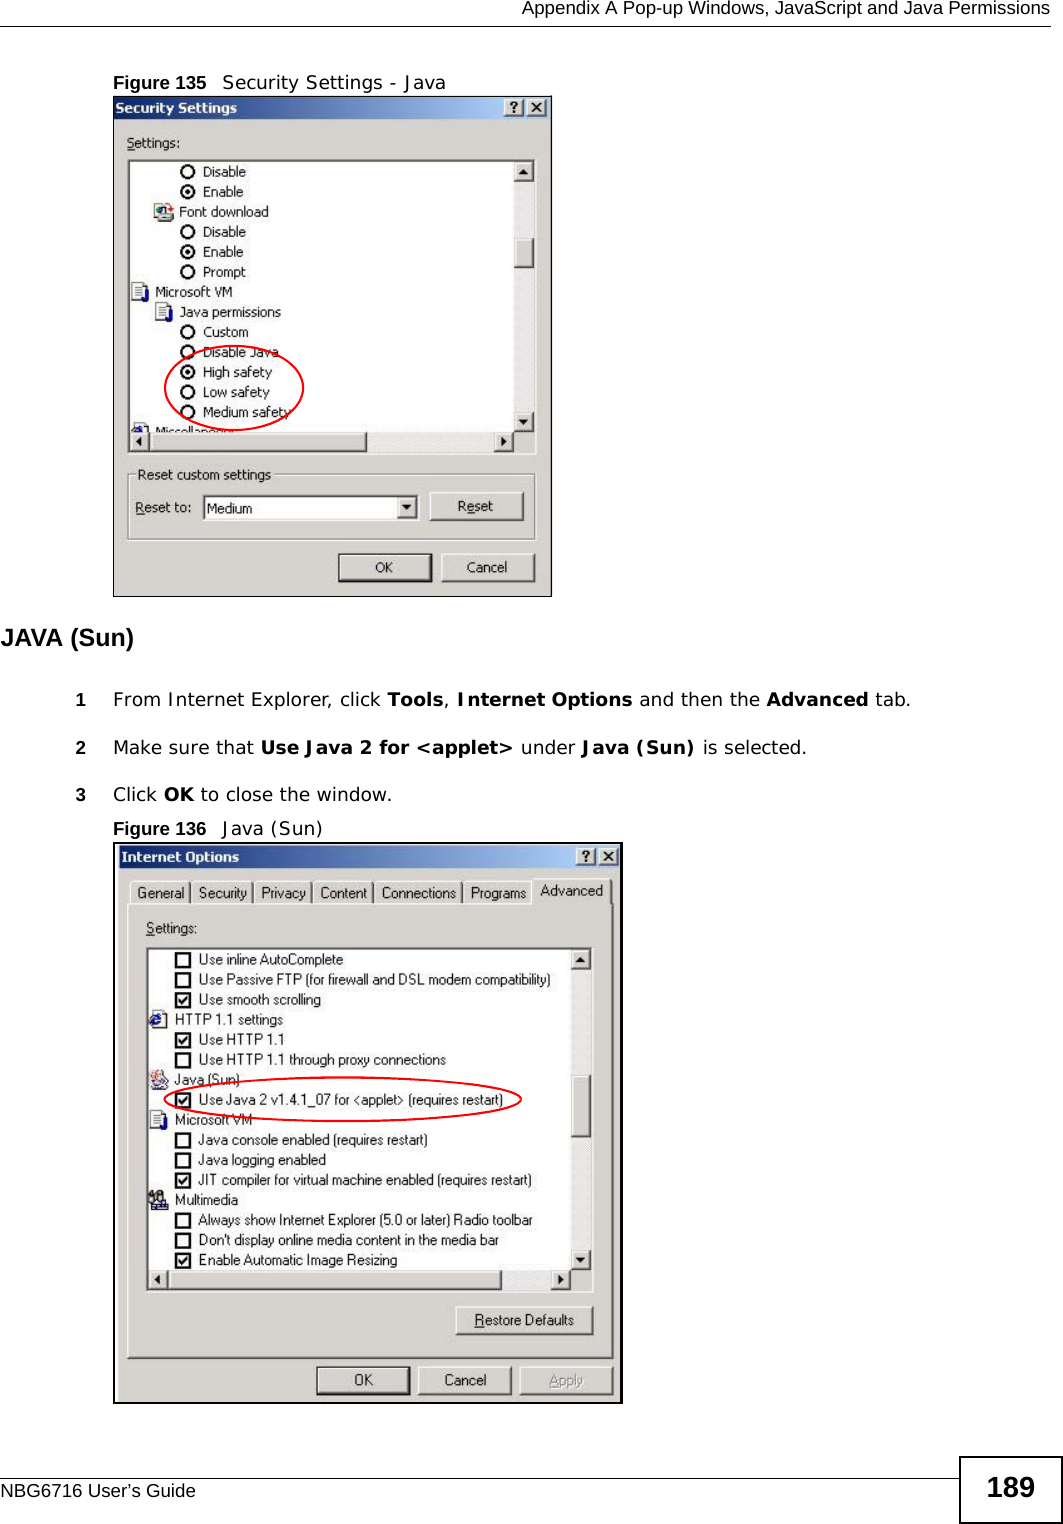  Appendix A Pop-up Windows, JavaScript and Java PermissionsNBG6716 User’s Guide 189Figure 135   Security Settings - Java JAVA (Sun)1From Internet Explorer, click Tools, Internet Options and then the Advanced tab. 2Make sure that Use Java 2 for &lt;applet&gt; under Java (Sun) is selected.3Click OK to close the window.Figure 136   Java (Sun)